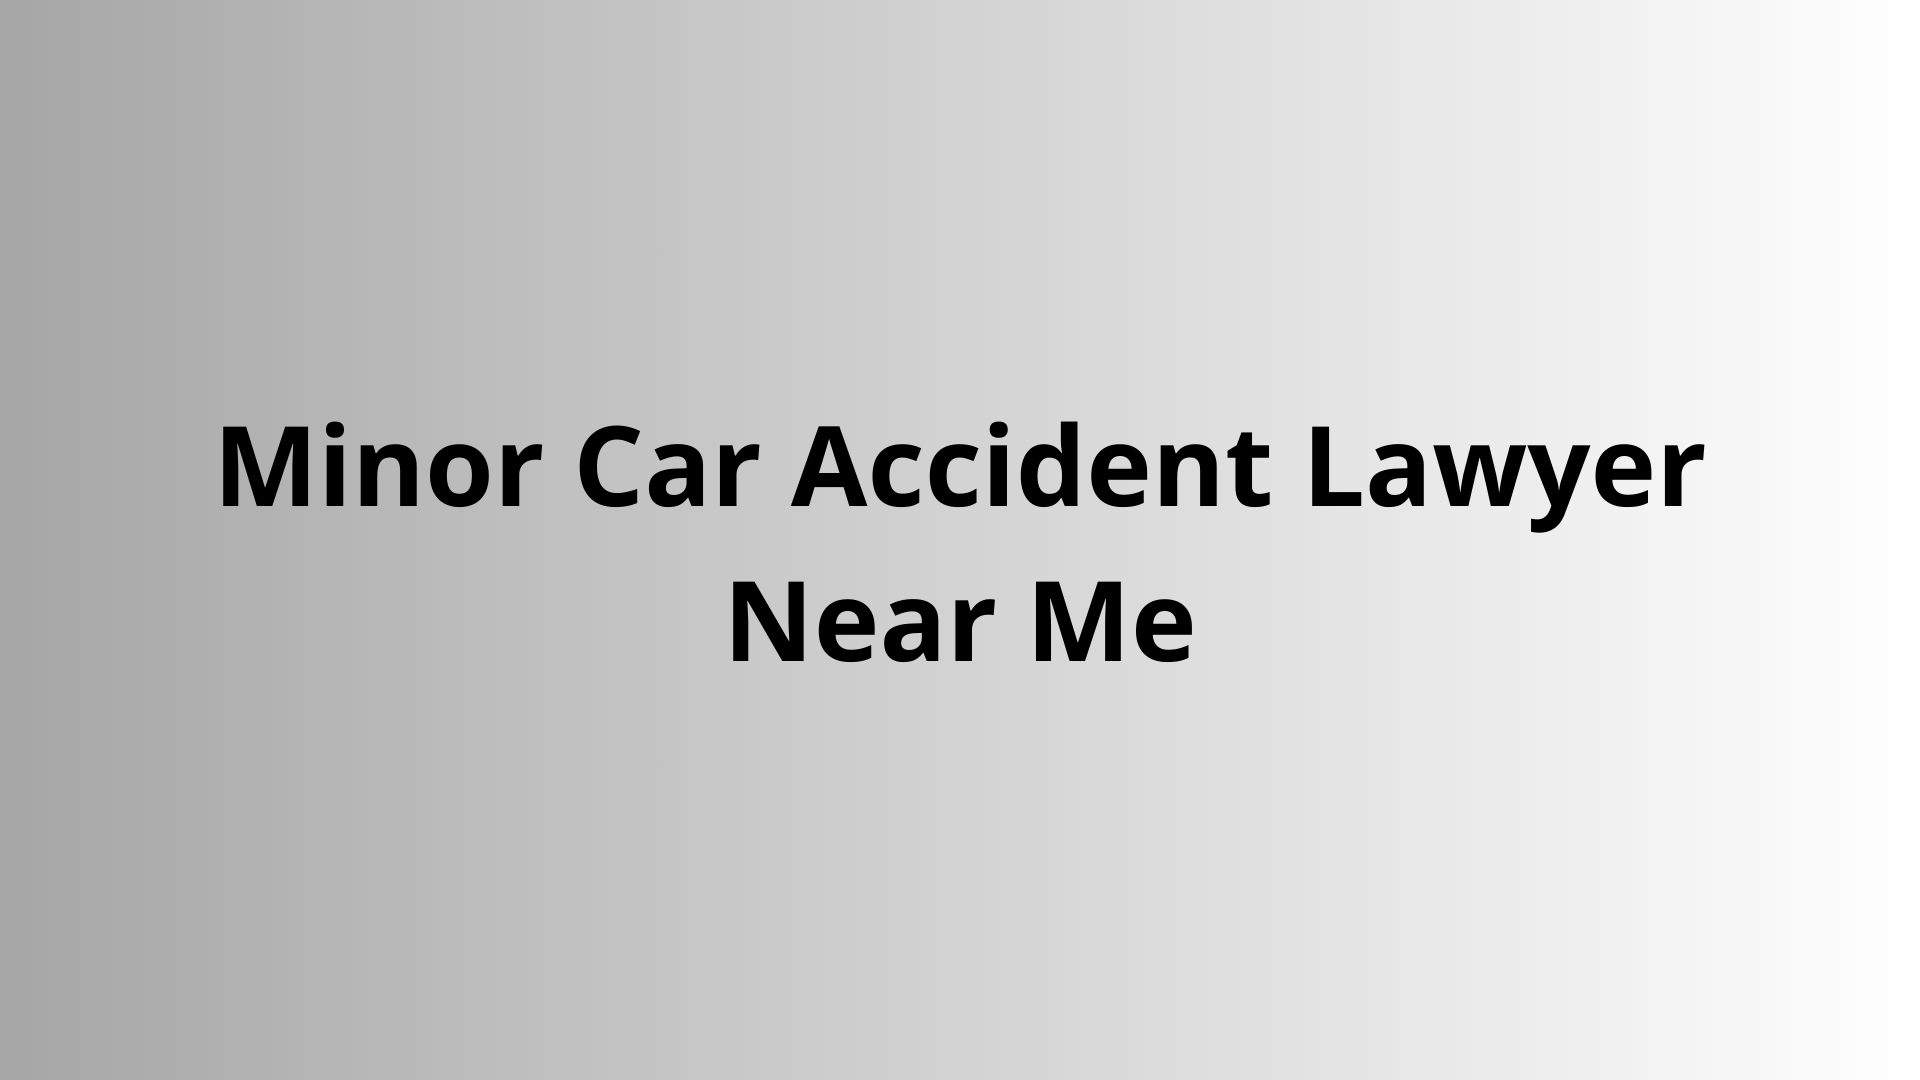 Minor Car Accident Lawyer Near Me